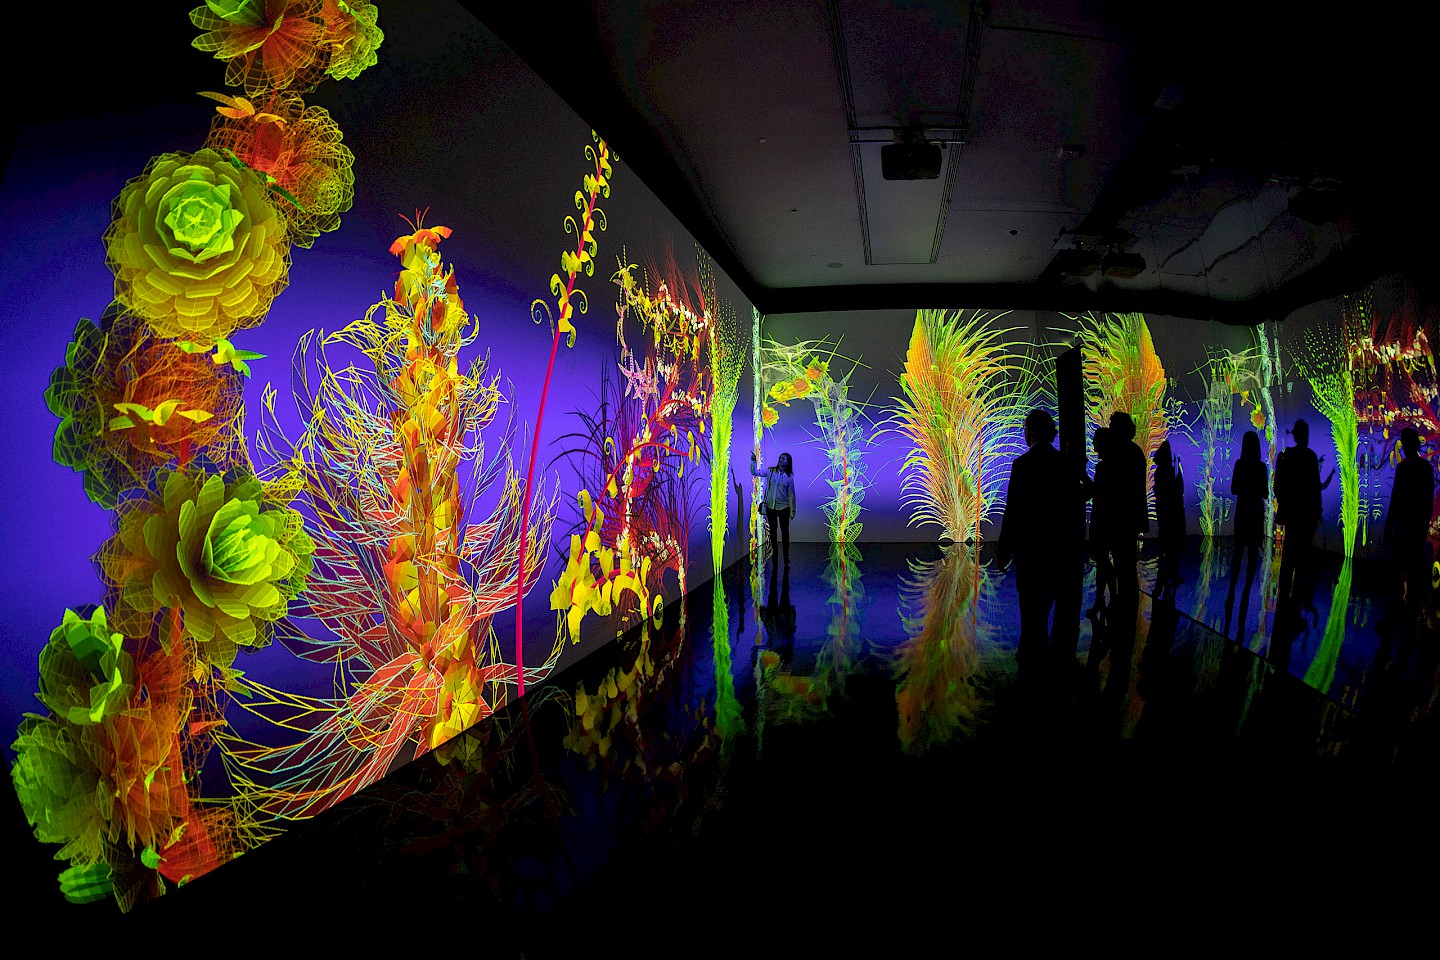 A large projection by artist Miguel Chevalier, with digital flowers growing and moving.